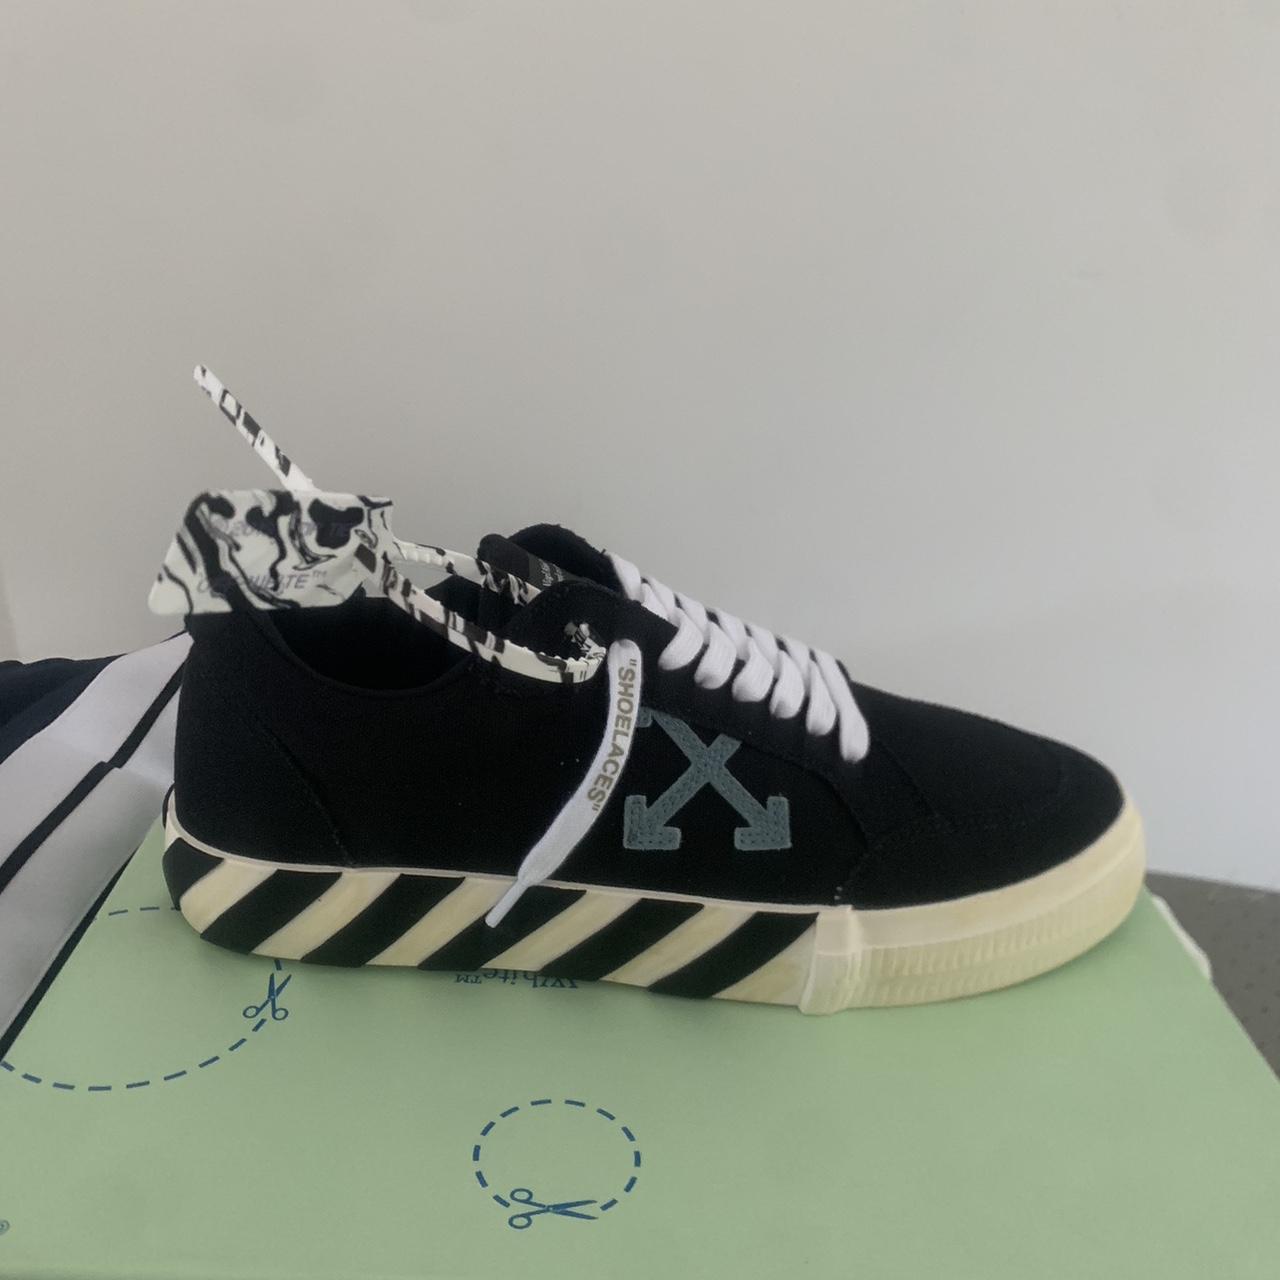 Off-White Men's Black and White Trainers | Depop